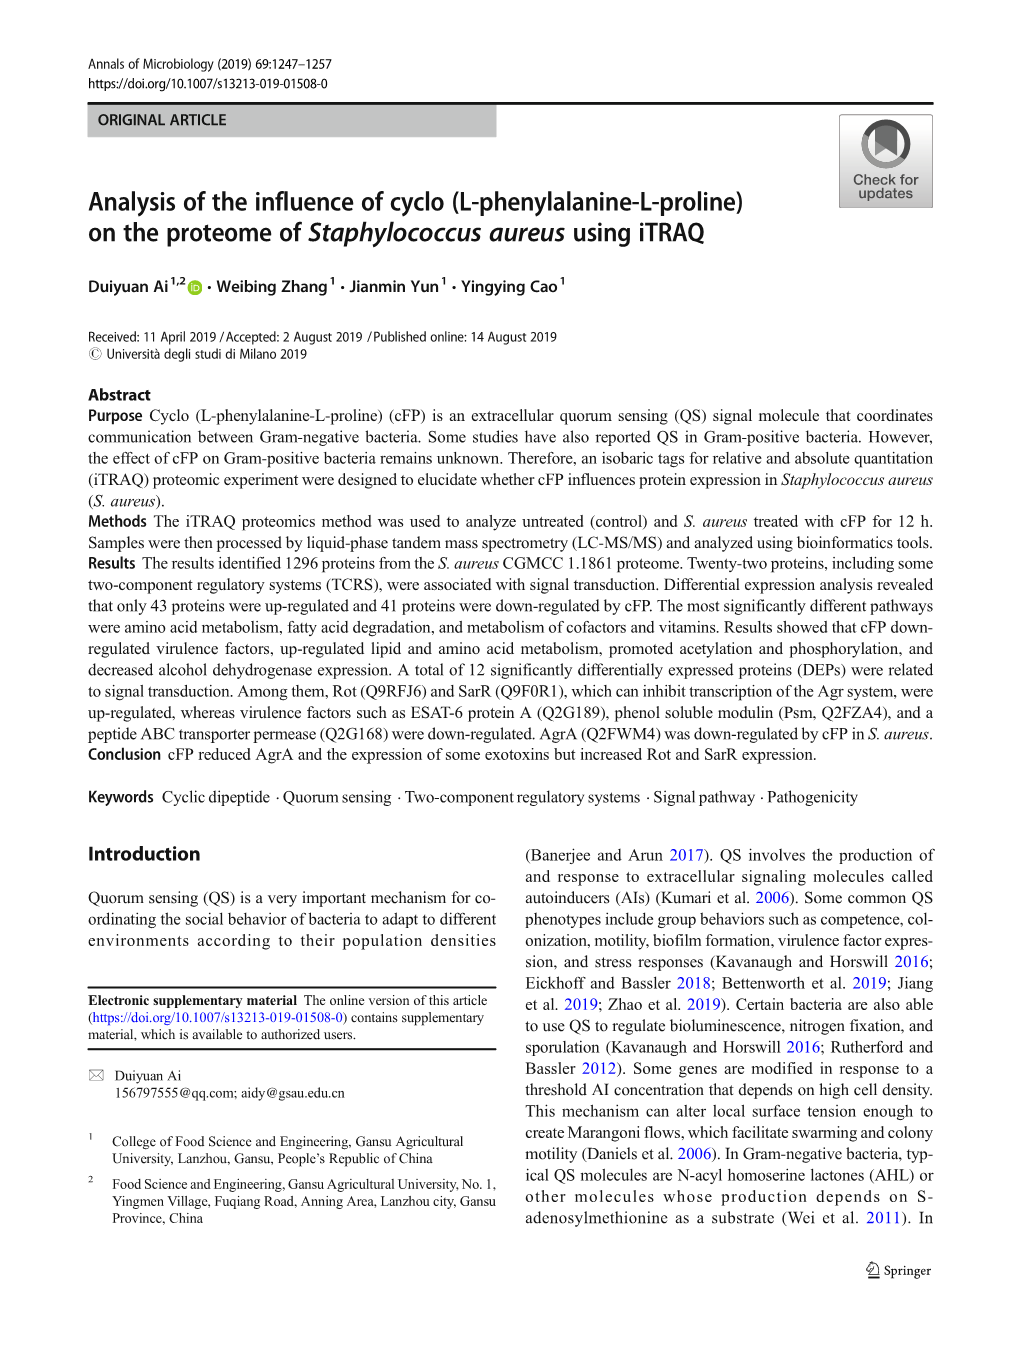 L-Phenylalanine-L-Proline) on the Proteome of Staphylococcus Aureus Using Itraq